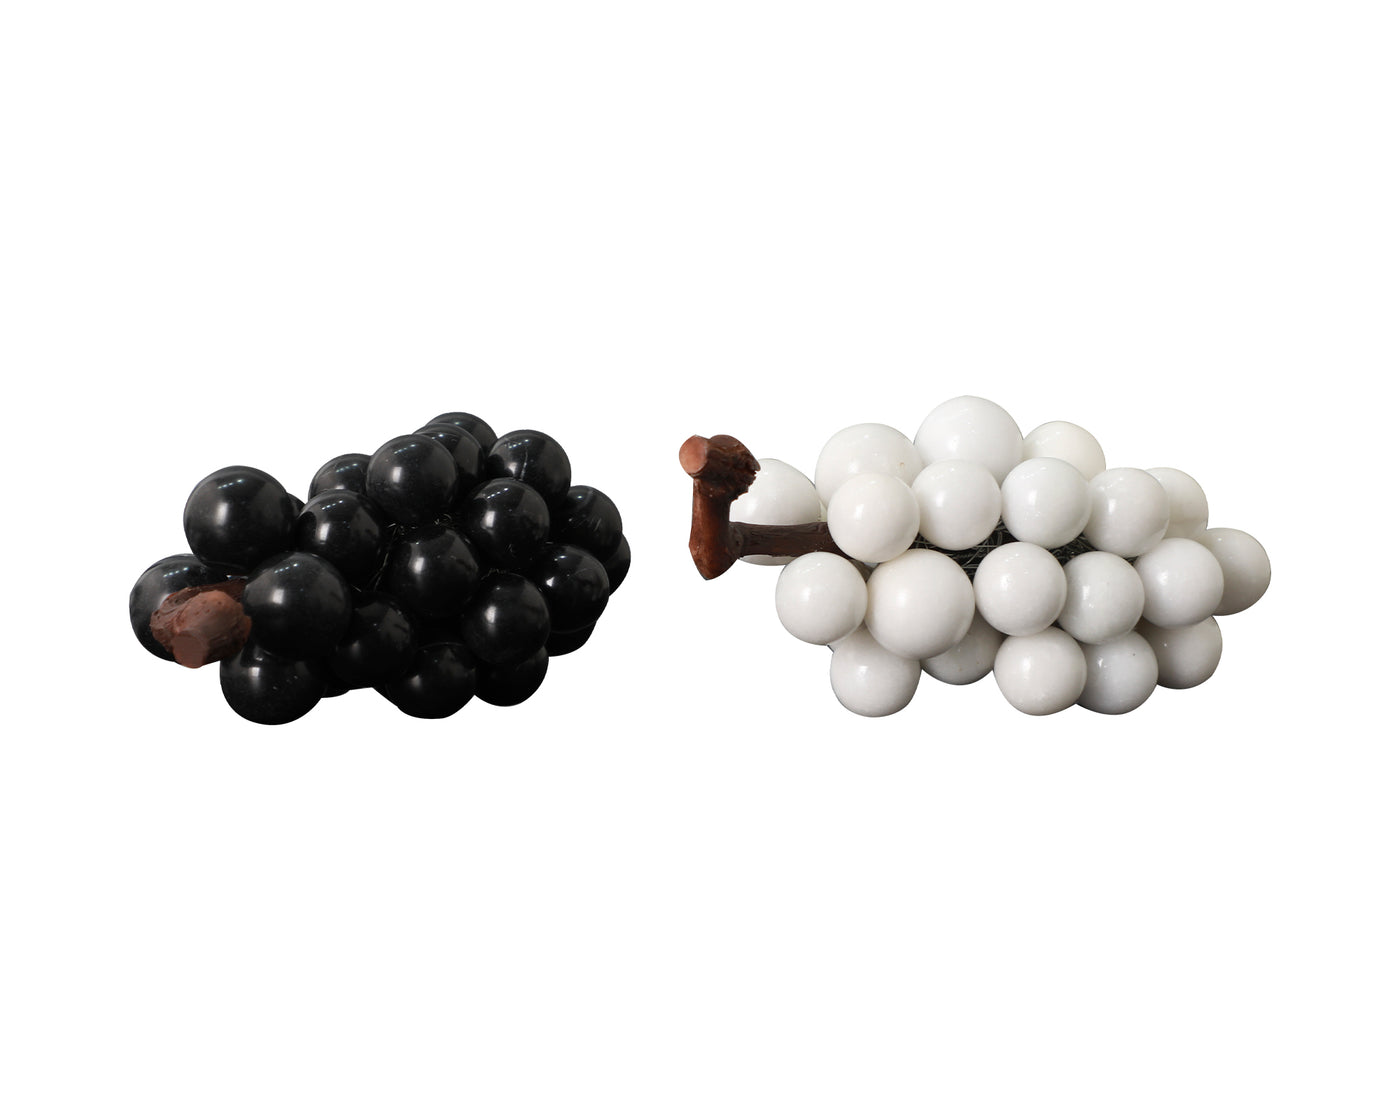 Marble Grapes – Black